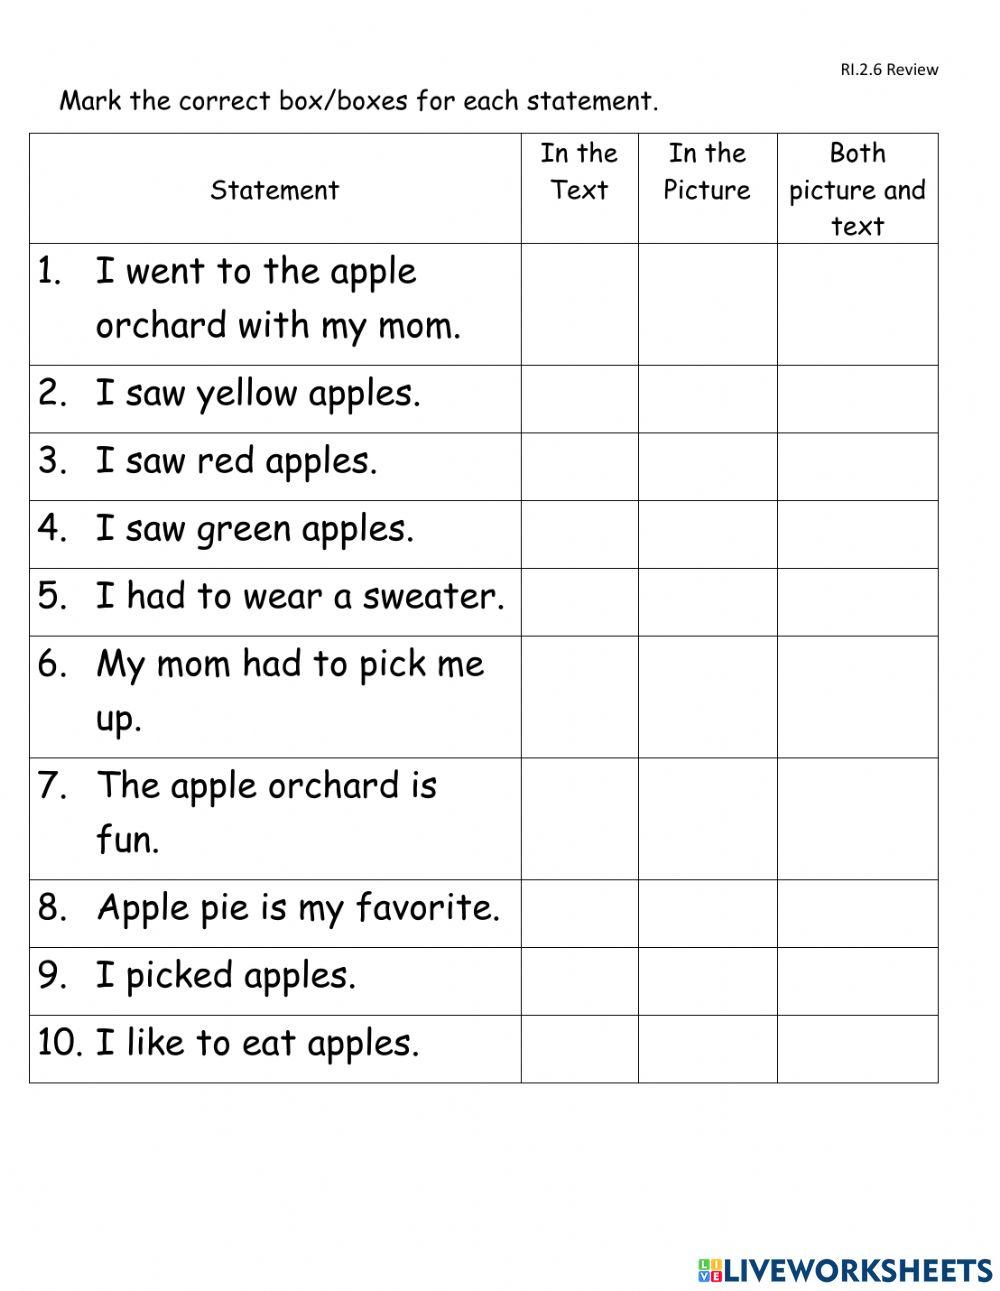 I went to the apple orchard-text and picture comparison